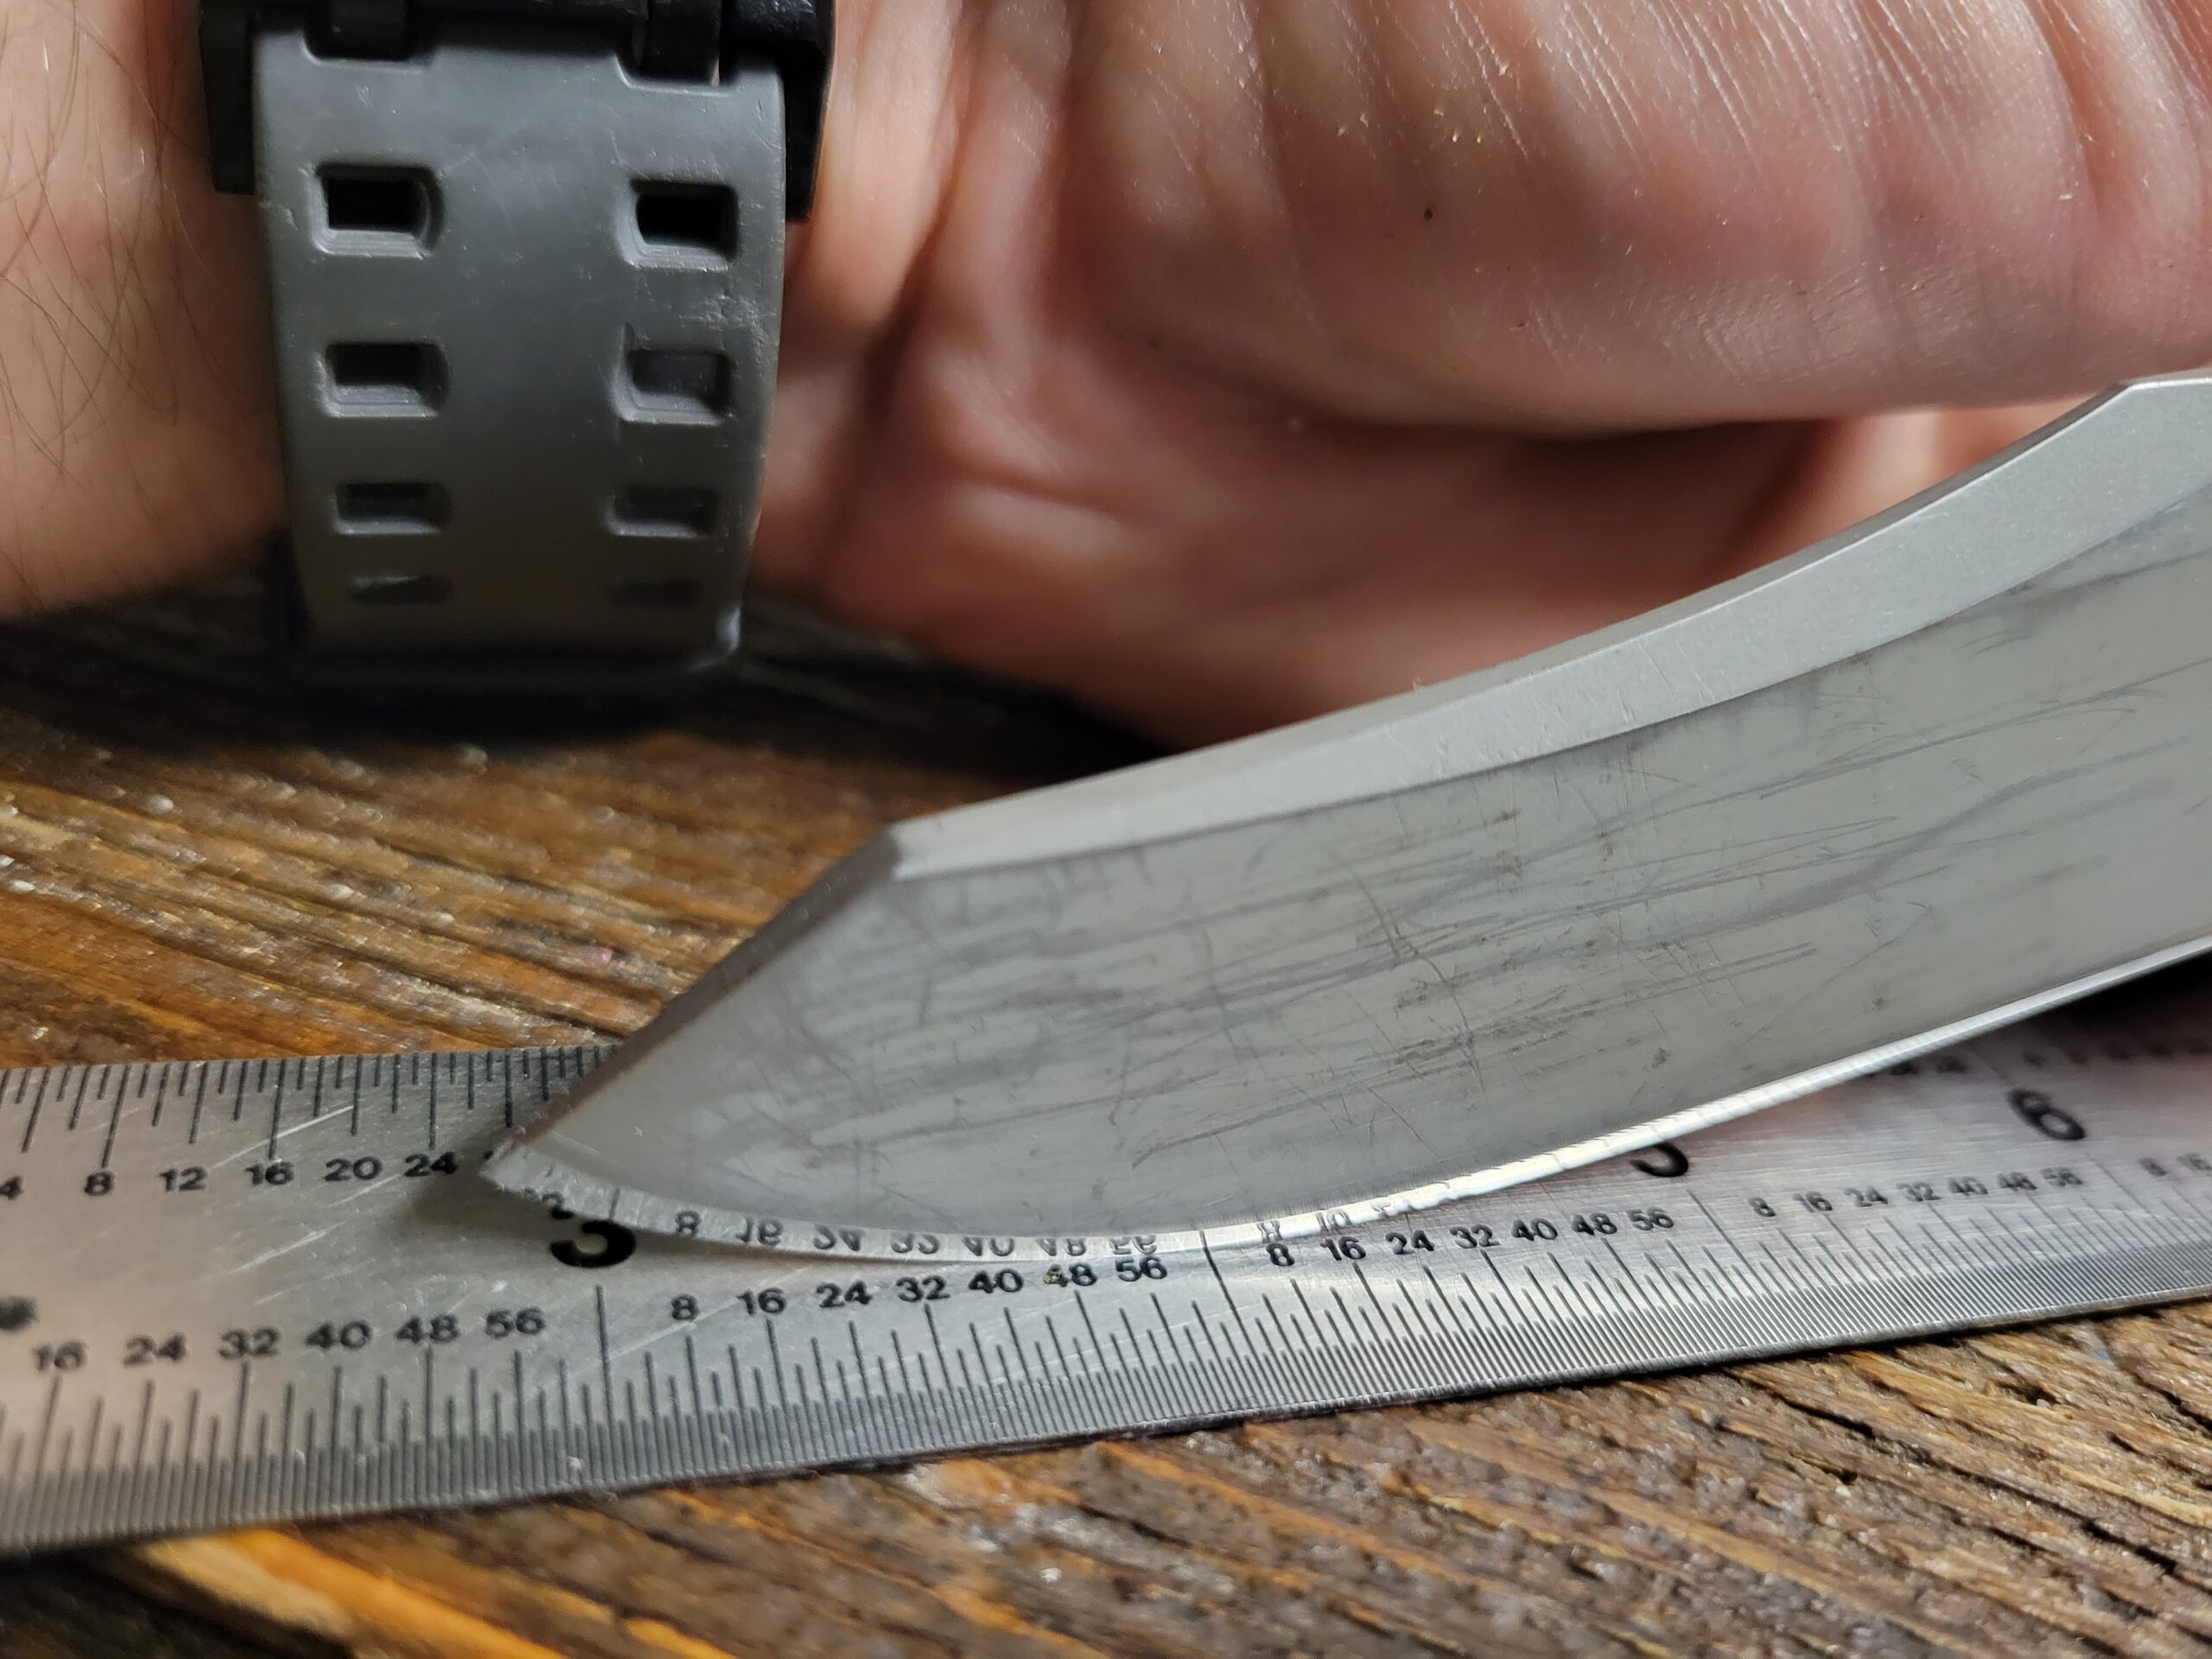 The finished edge of a sharpened pocket knife